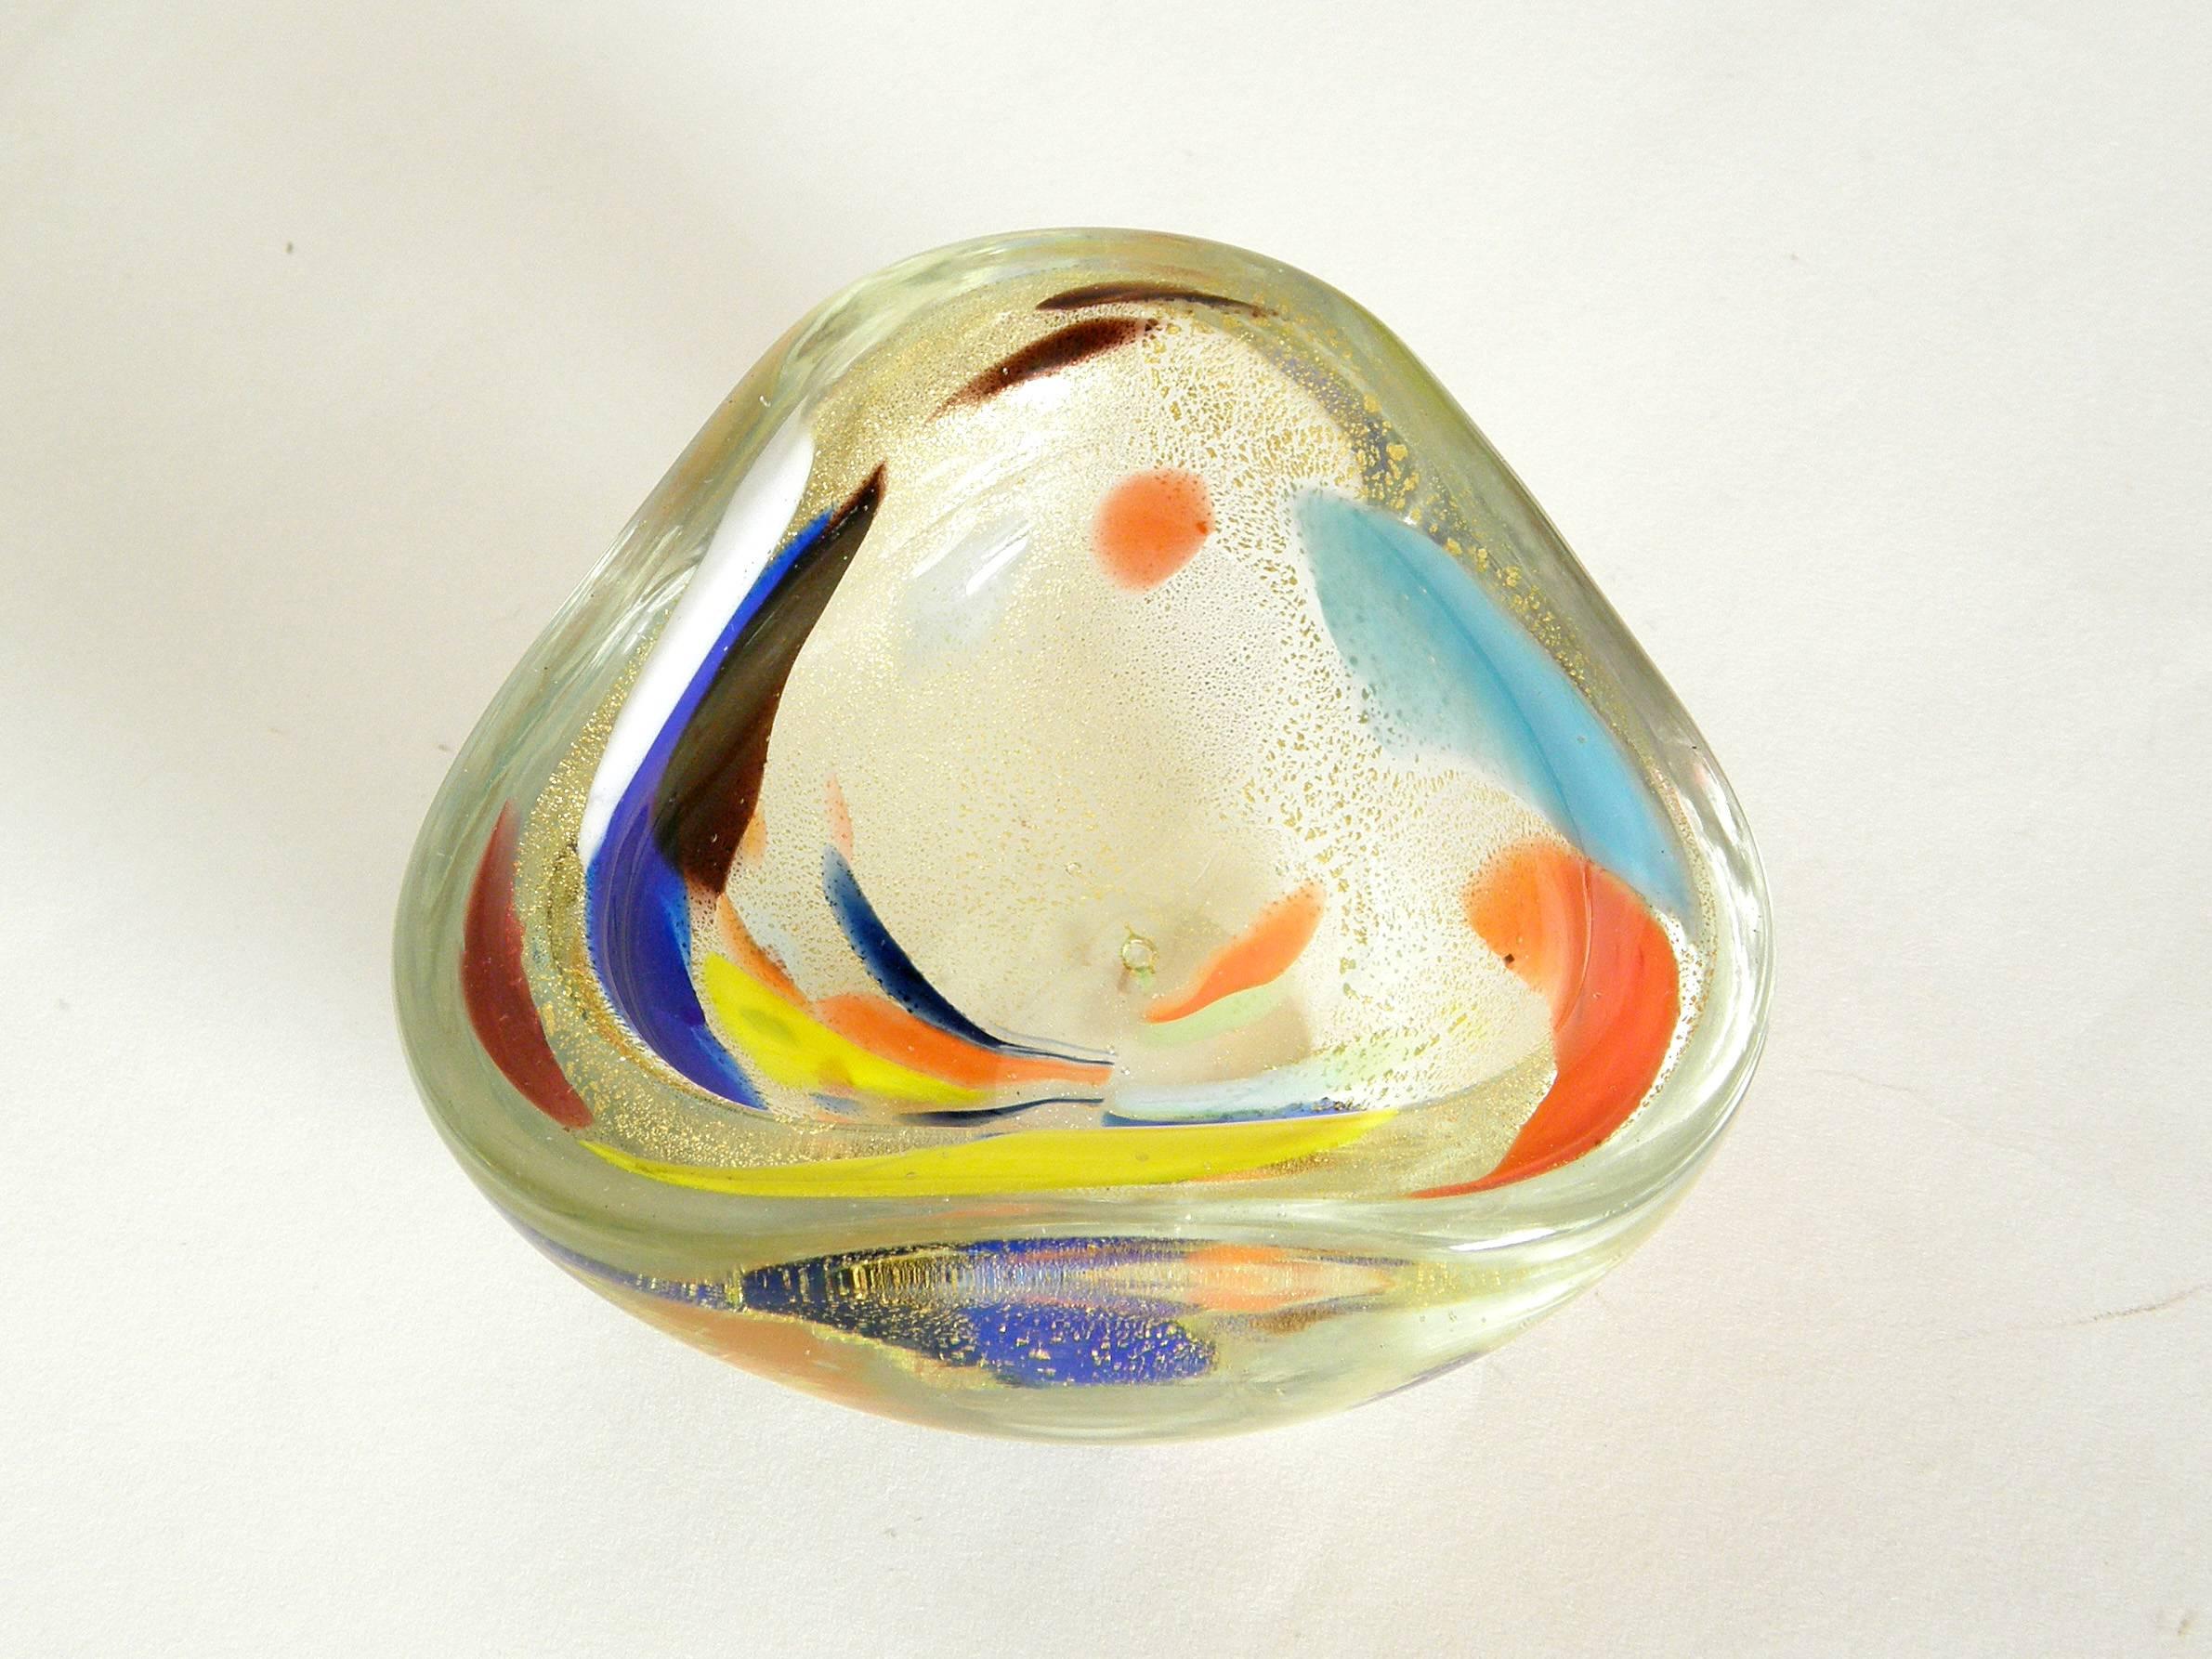 This petite, Murano glass tricorn bowl with patchy, multicolored designs was done after the style of the Italian glass artist, Dino Martens.

Please contact us if you have any questions.